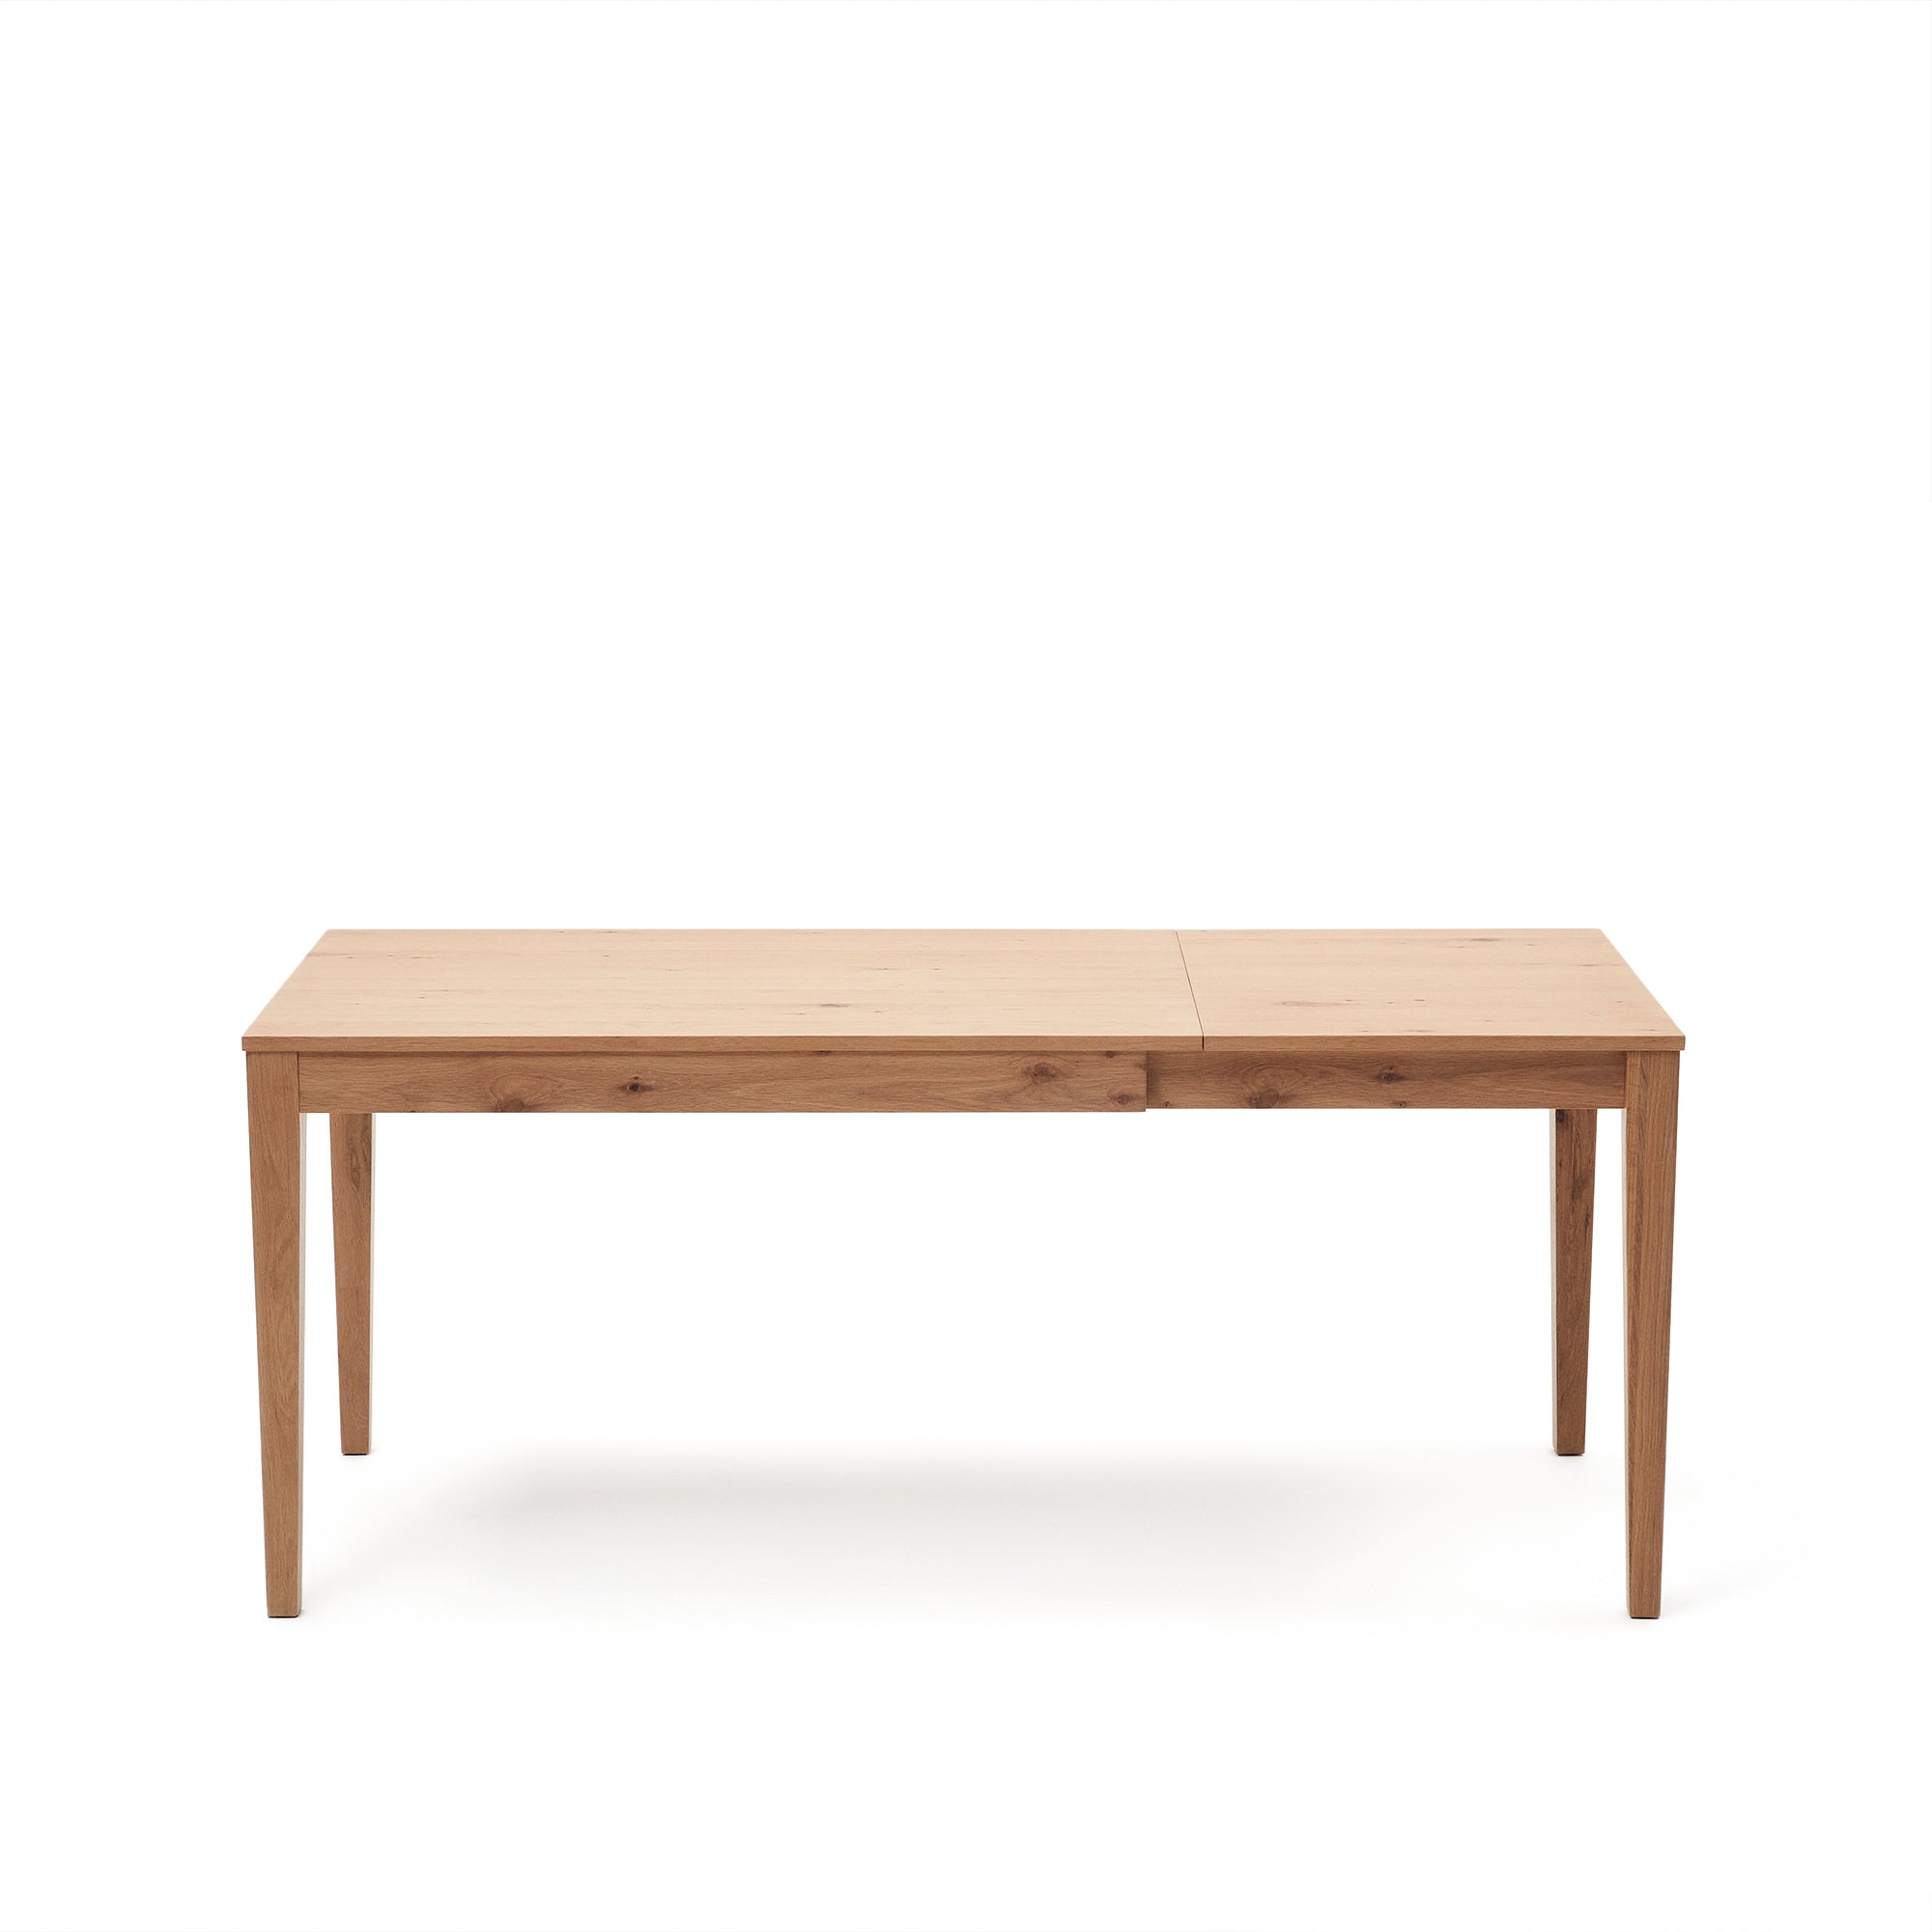 Yain extendable table with oak veneer and solid oak, 120 (180) x 80 cm